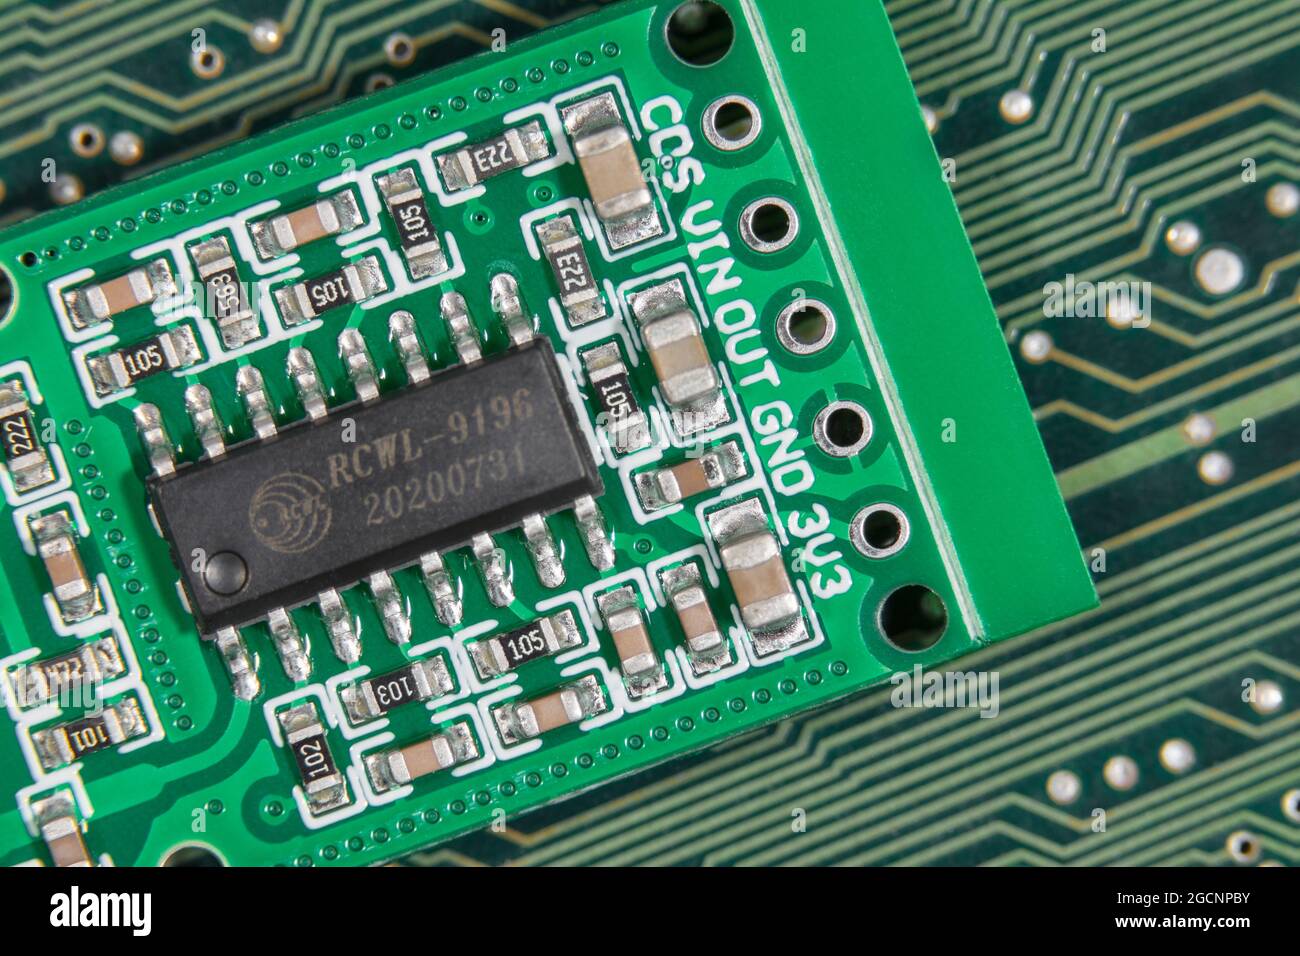 Macro close-up IC chip on small motion sensor circuit board pcb. Focus on lower components. Chip is a transmission signal processing control chip. Stock Photo